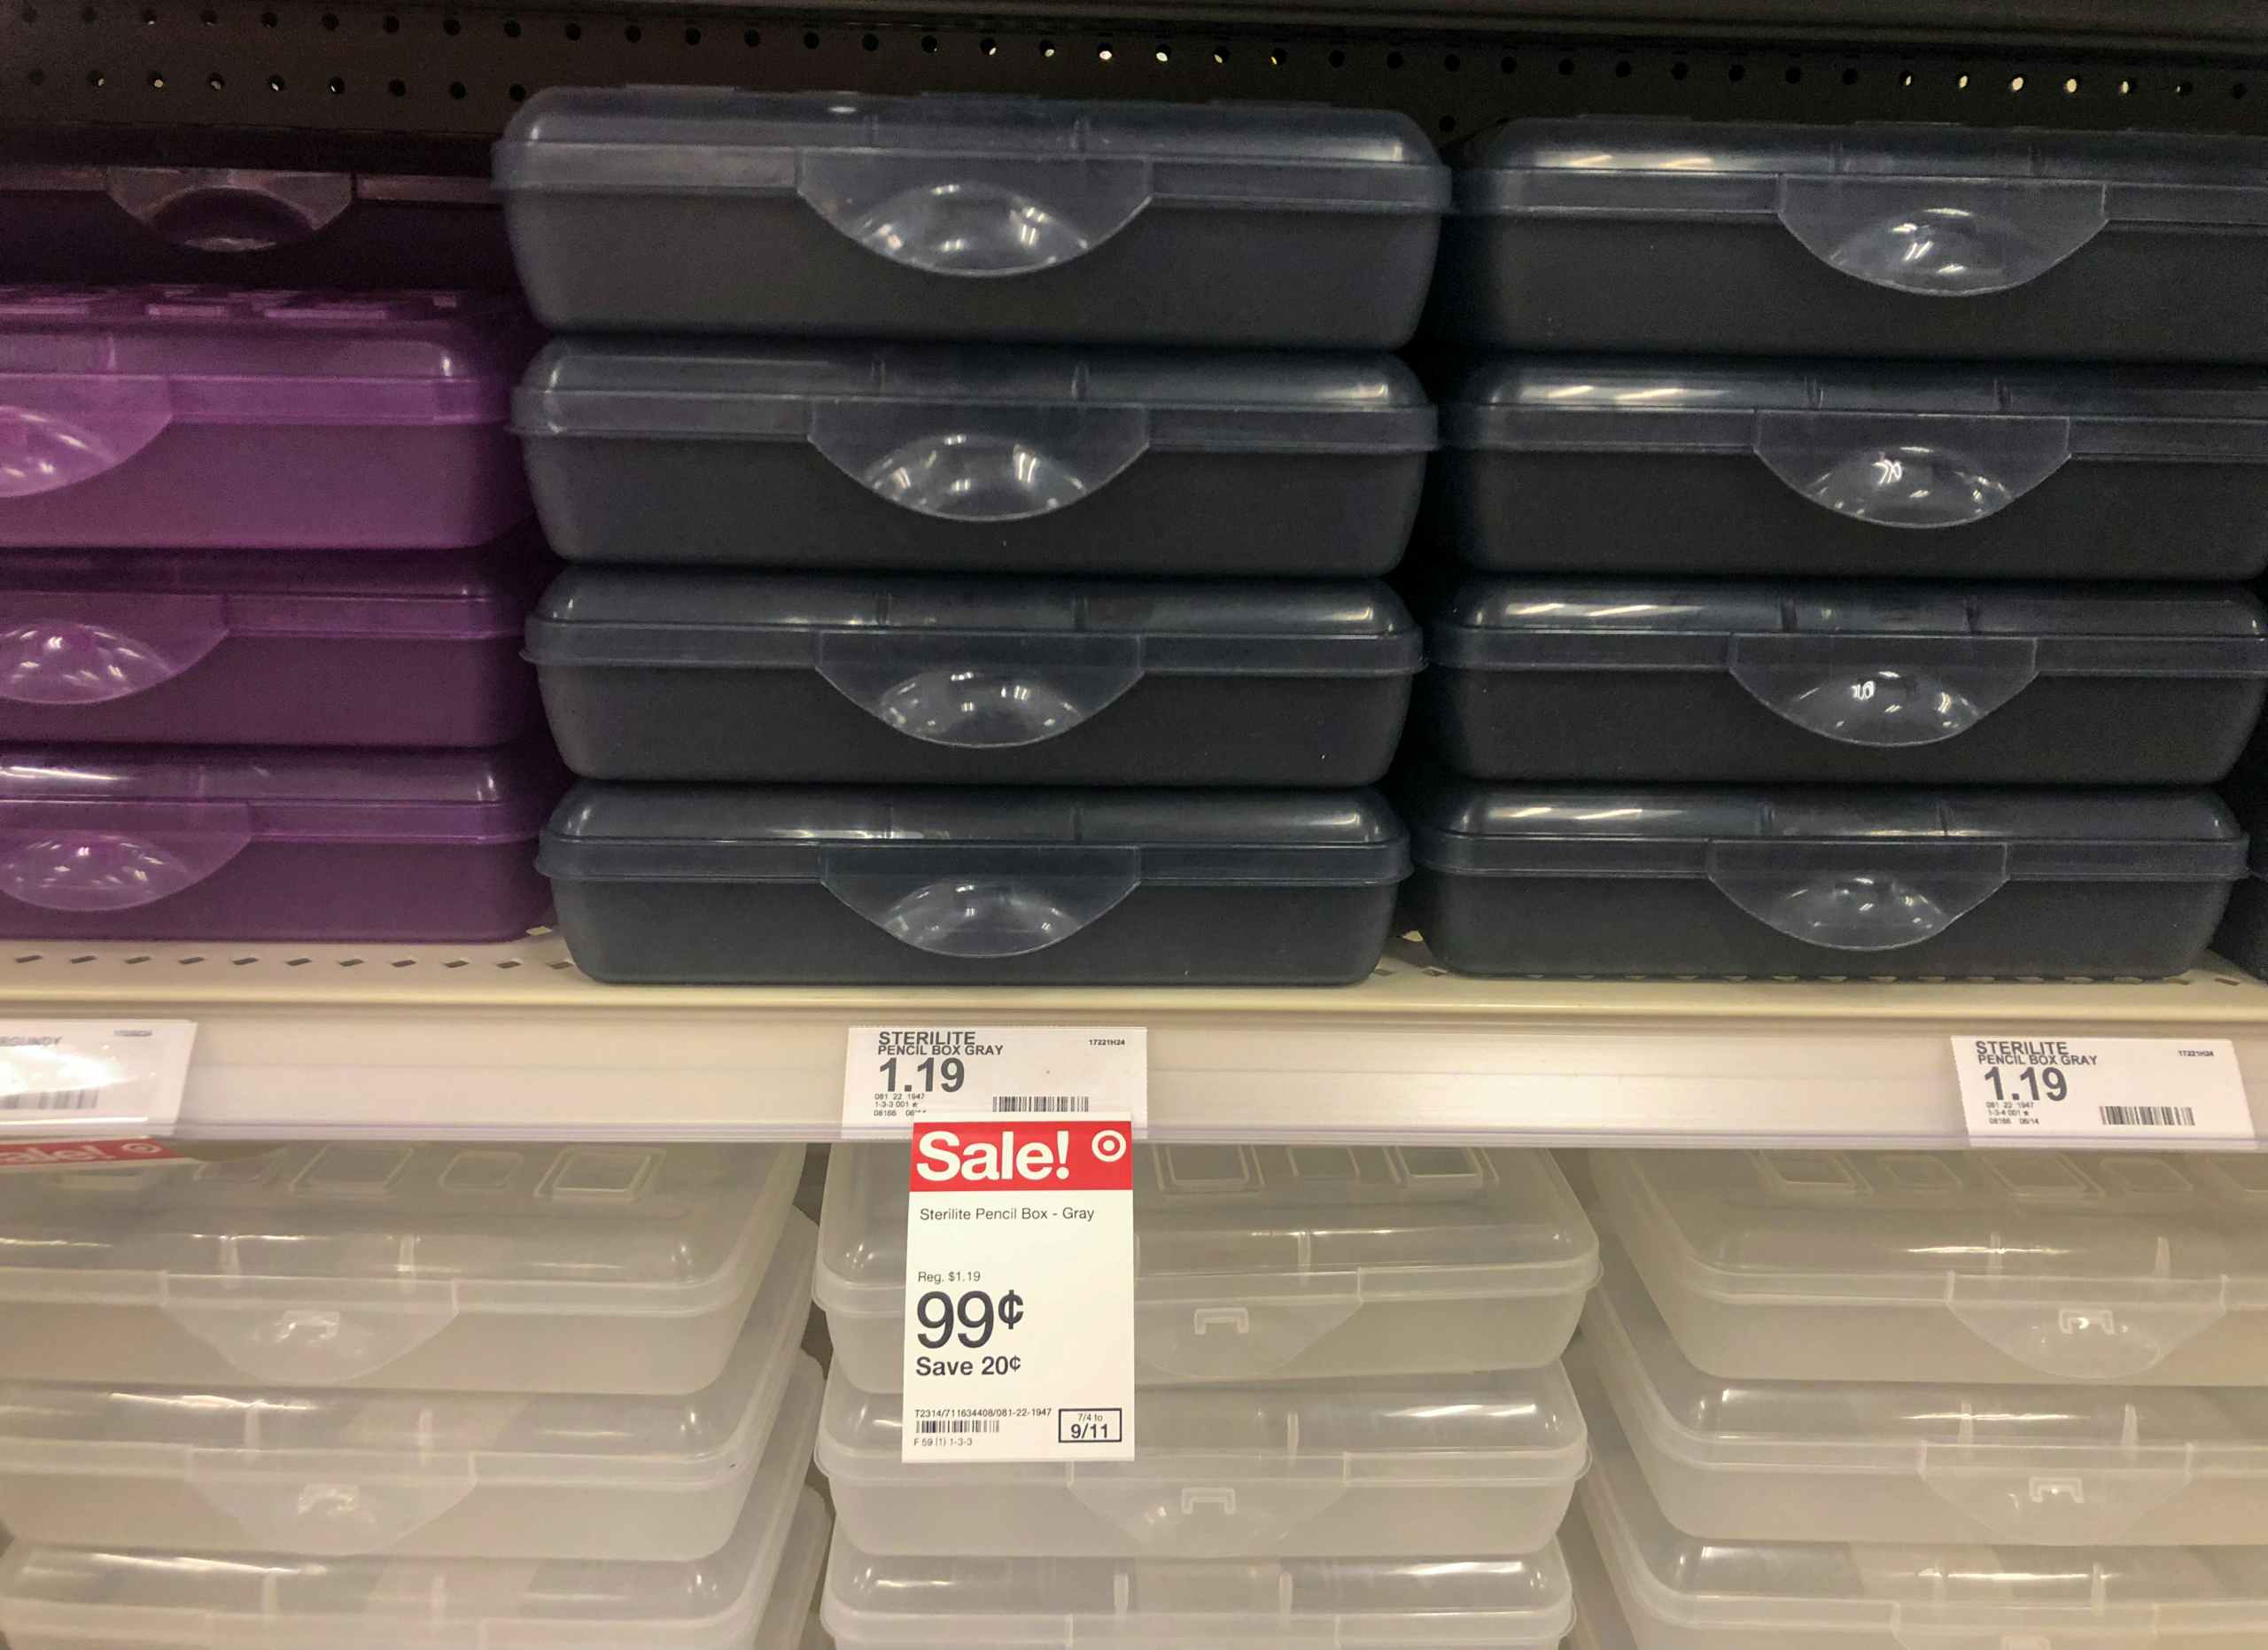 pencil boxes on display at Target with $0.99 sale tag